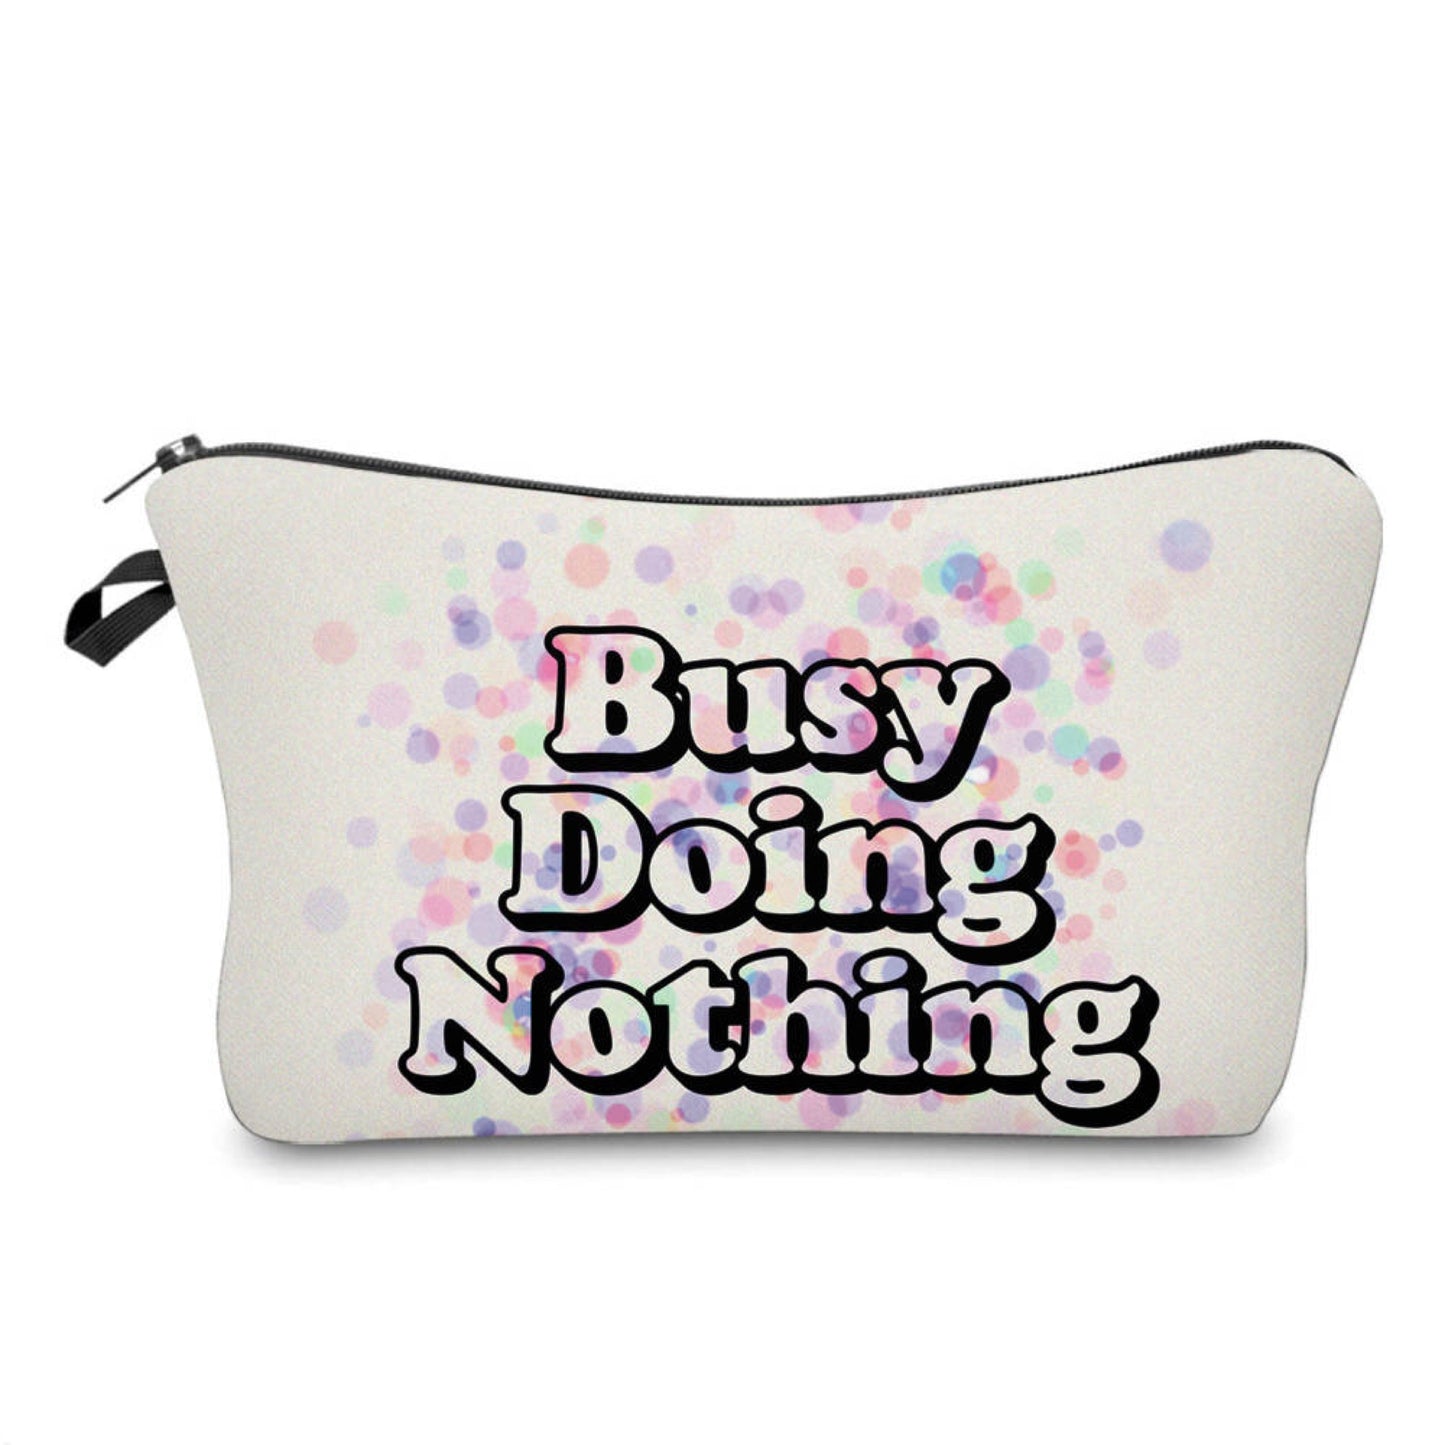 Pouch - Busy Doing Nothing *While Supplies Last*